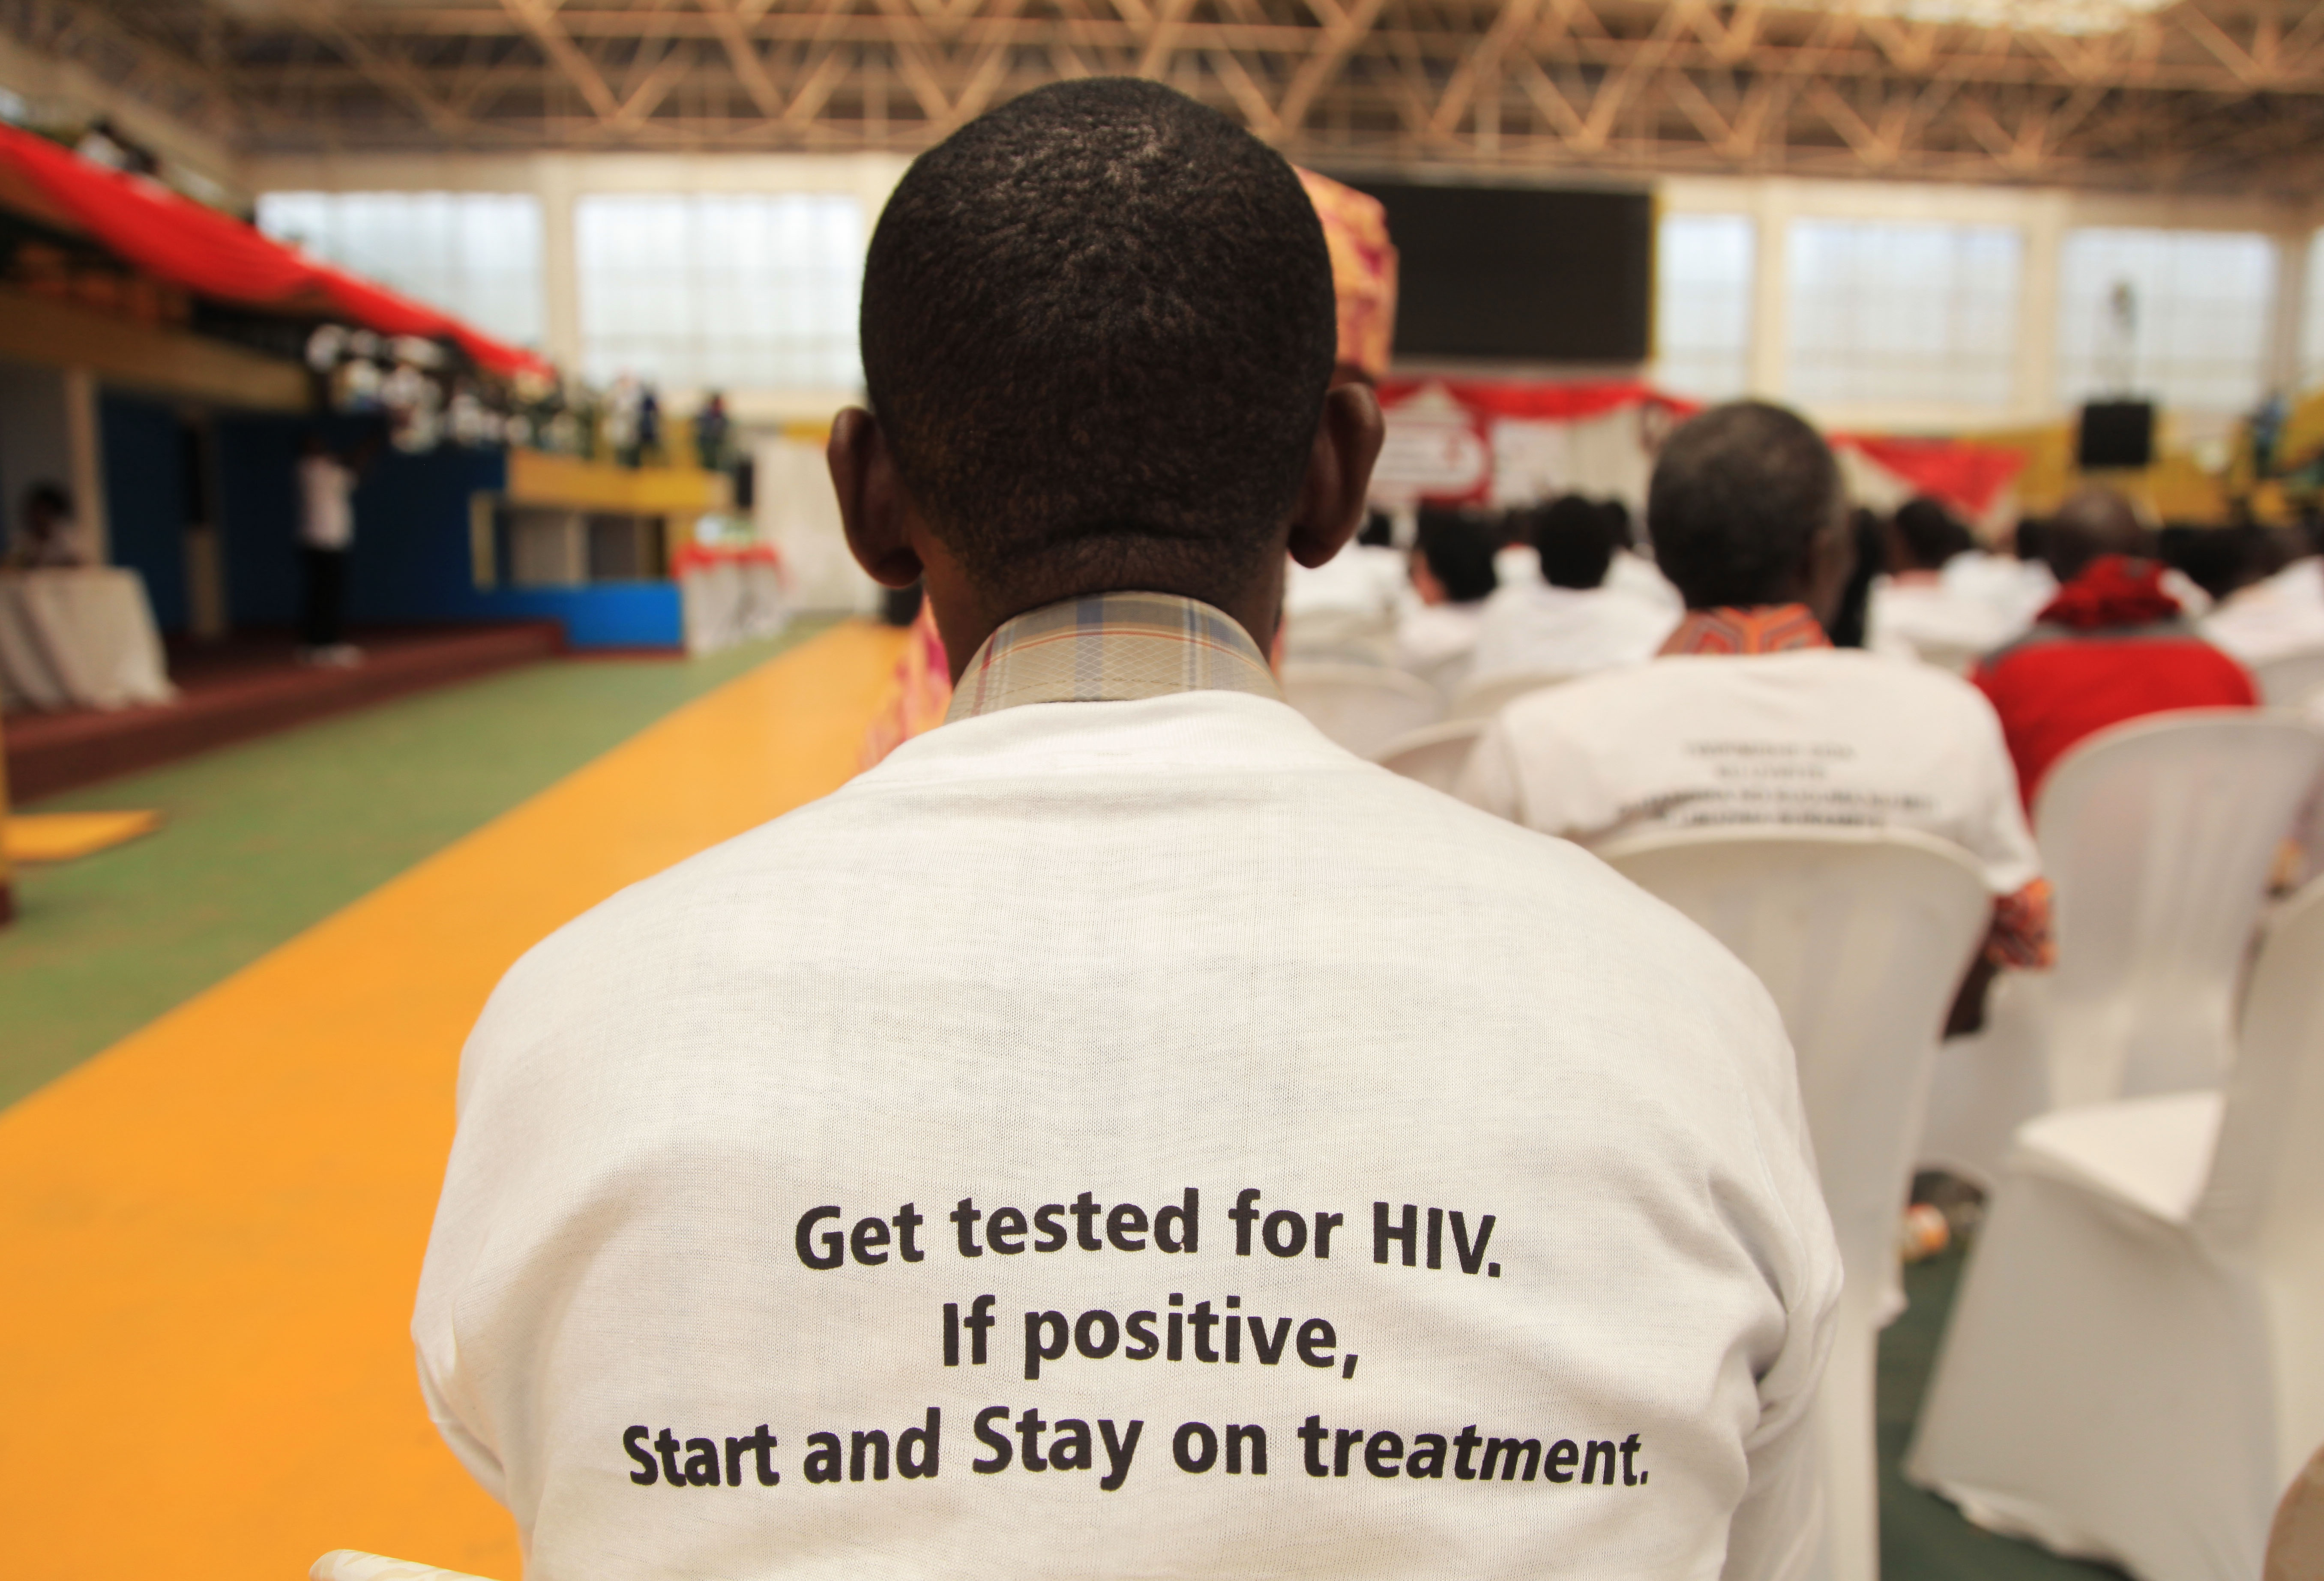 Stigma and discrimination against people infected with HIV/AIDS in Rwanda has dropped by 80 per cent. 